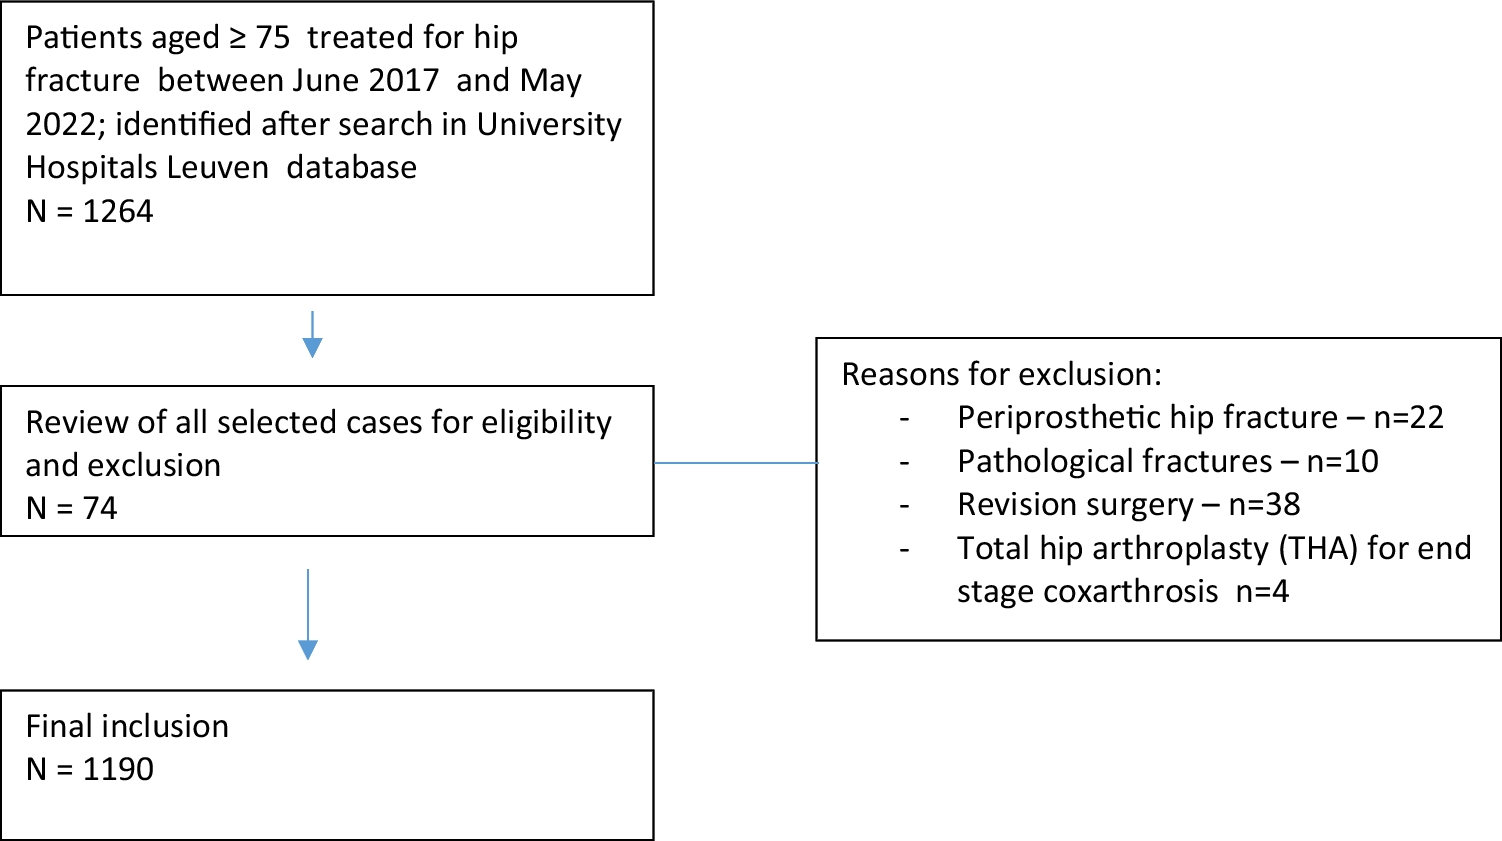 A retrospective chart analysis with 5-year follow-up of early care for geriatric hip fracture patients: why we should continue talking about hip fractures